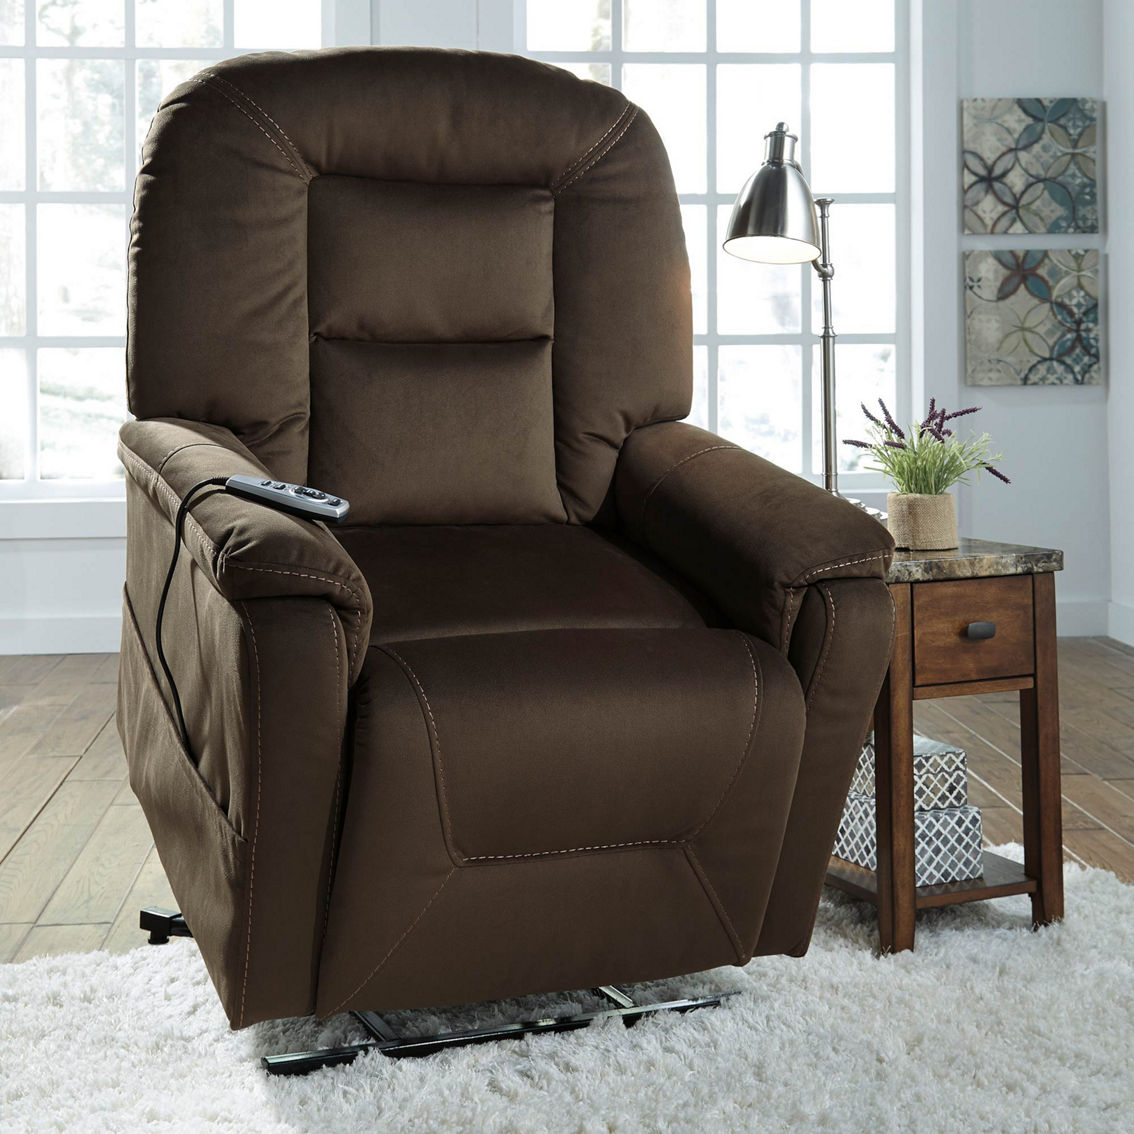 Ashley Samir Power Lift Recliner with Heat and Massage - Image 2 of 4